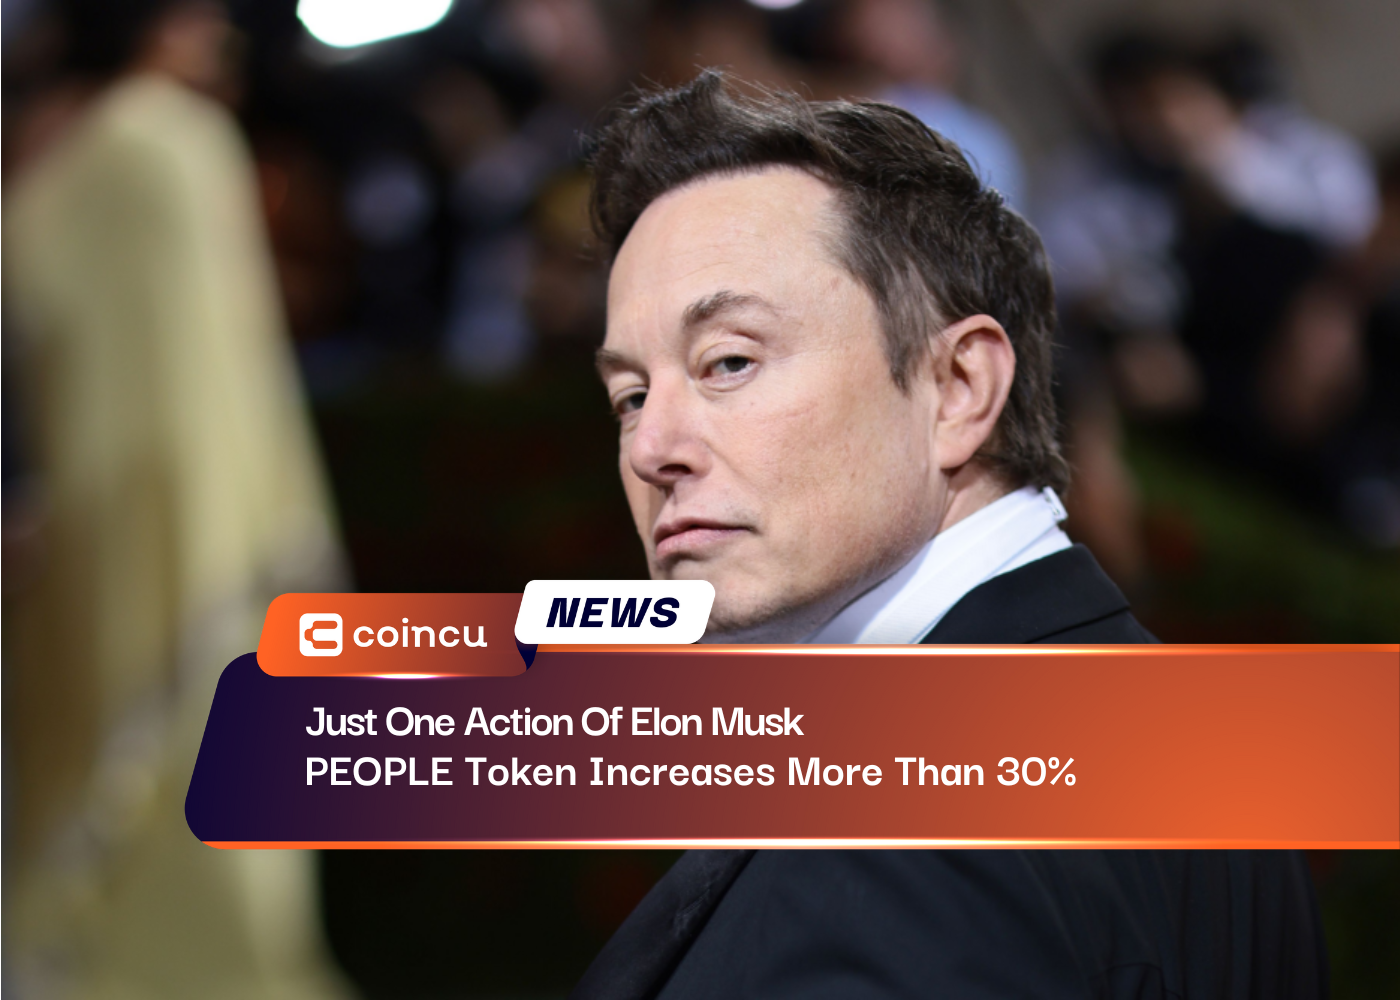 Just One Action Of Elon Musk, PEOPLE Token Increases More Than 30%